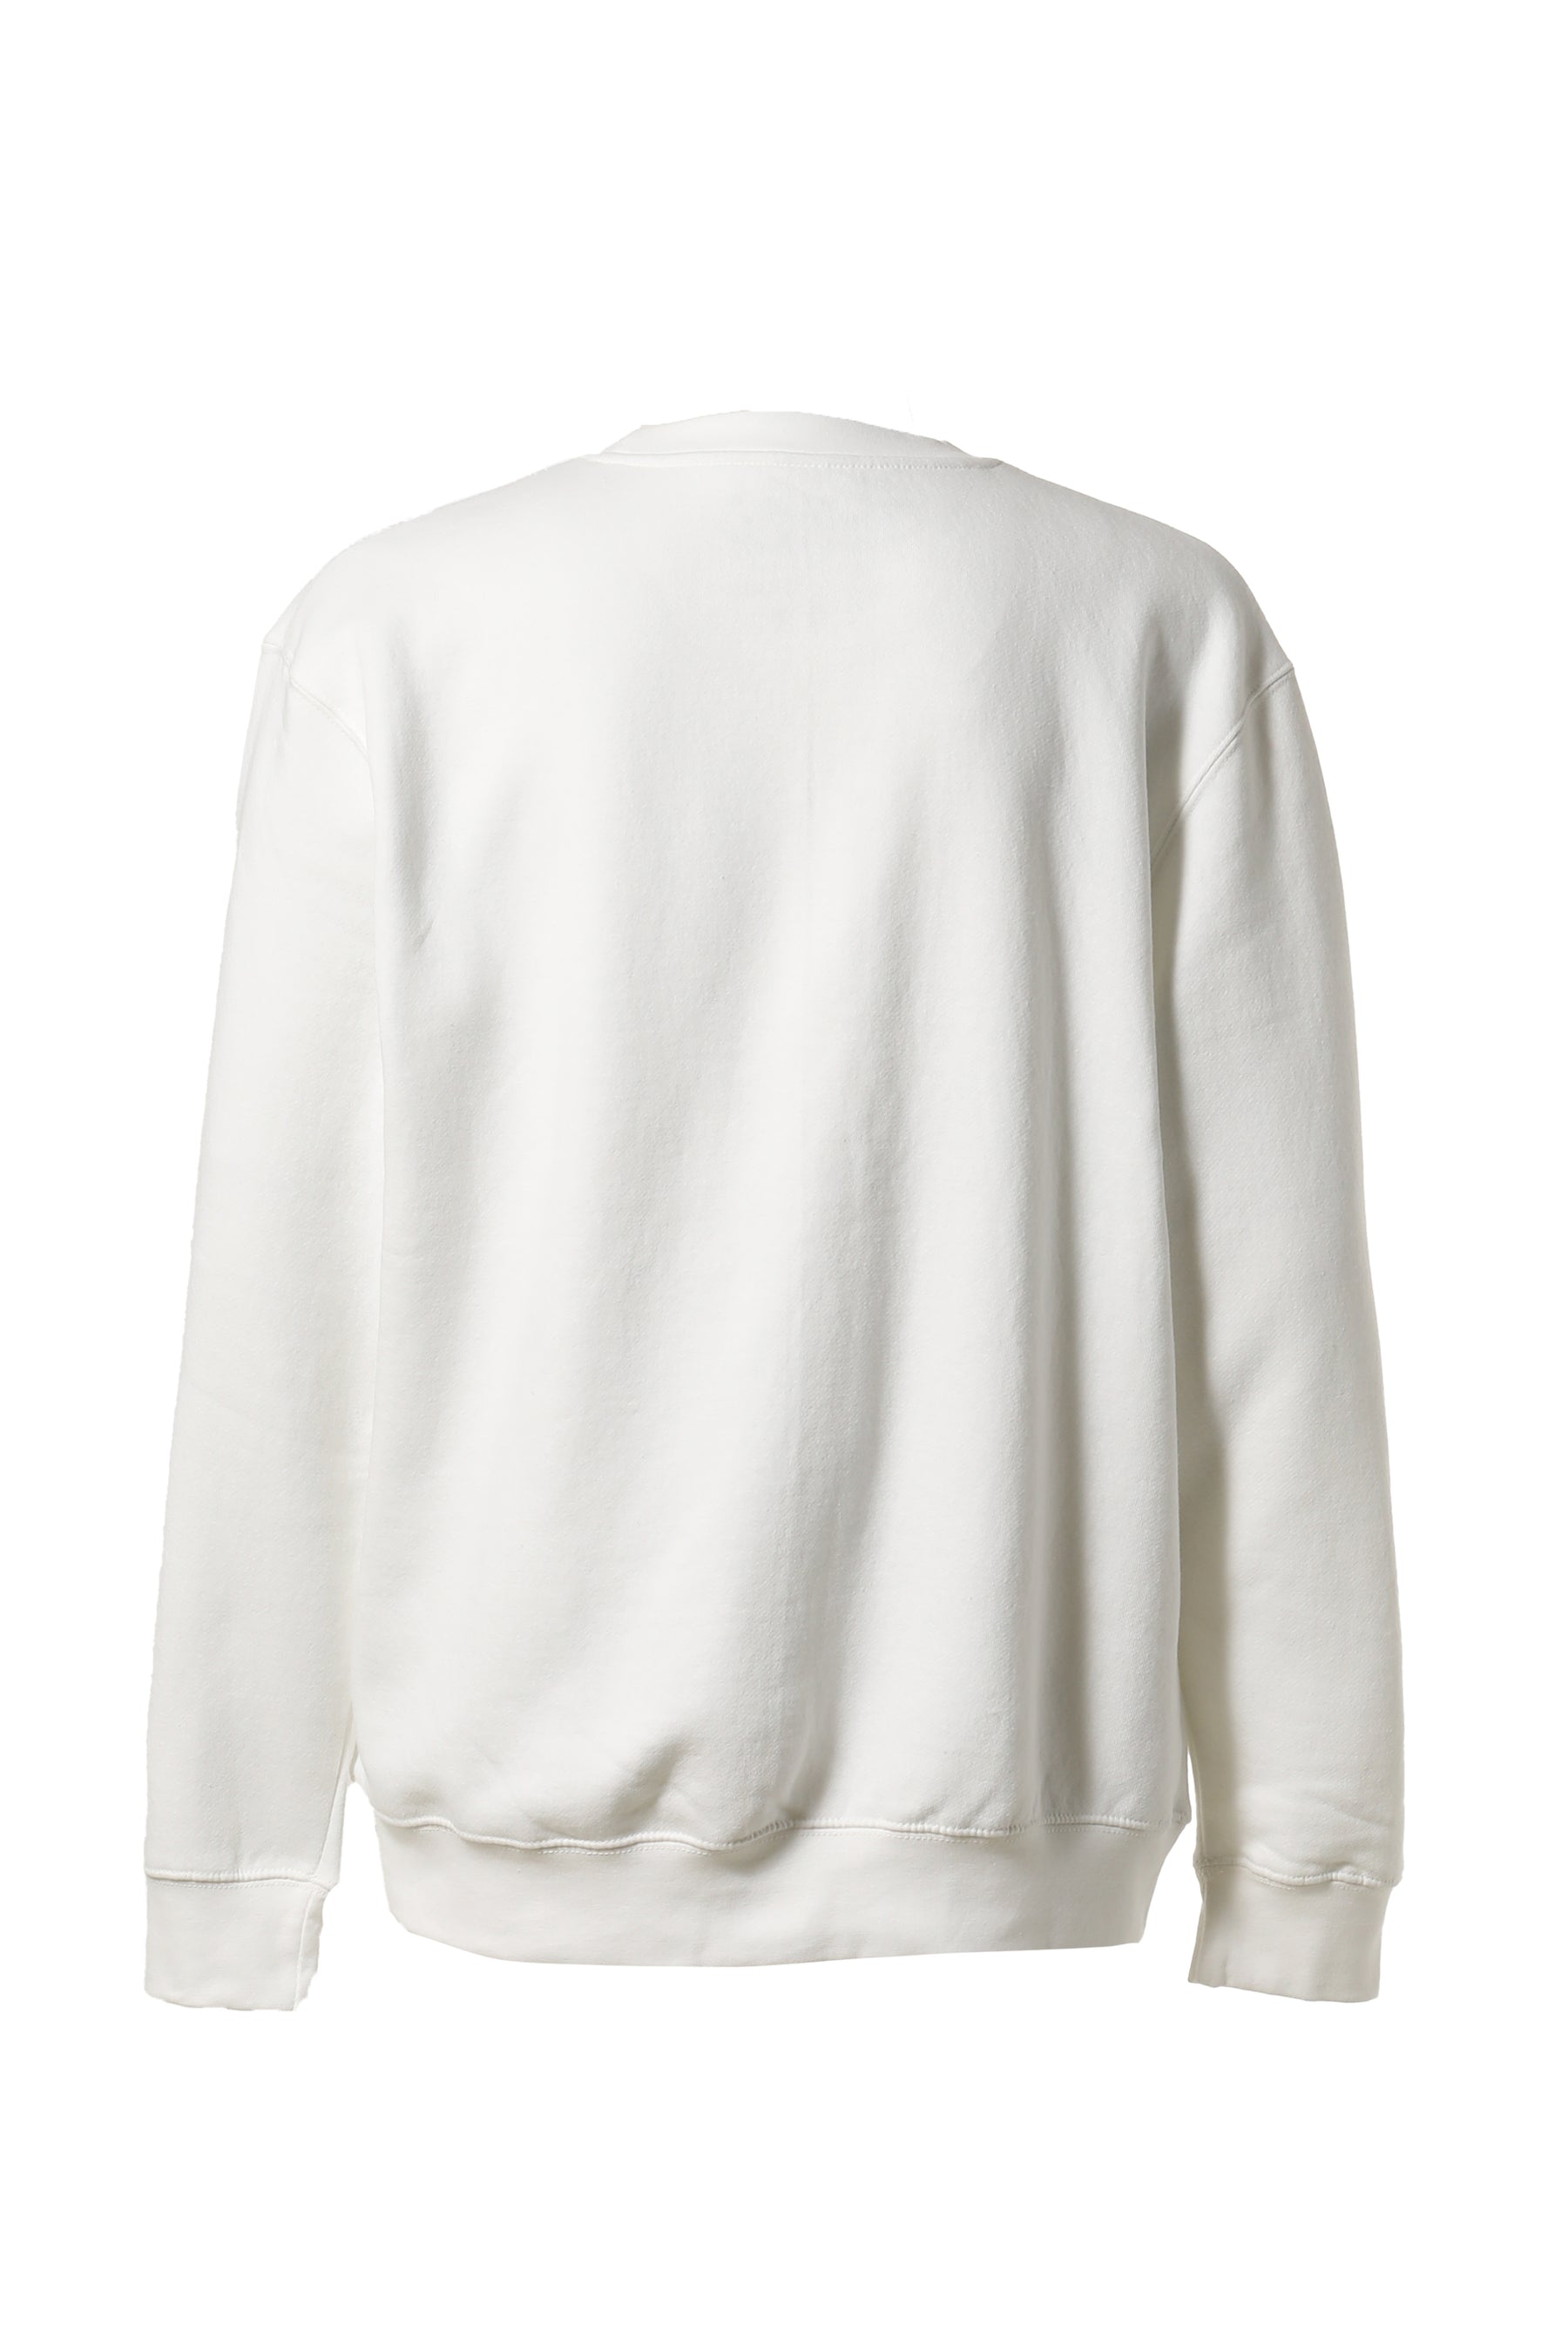 50TH AOHH SYNDICATE CREWNECK CLB(EXCLUSIVE) / WHT